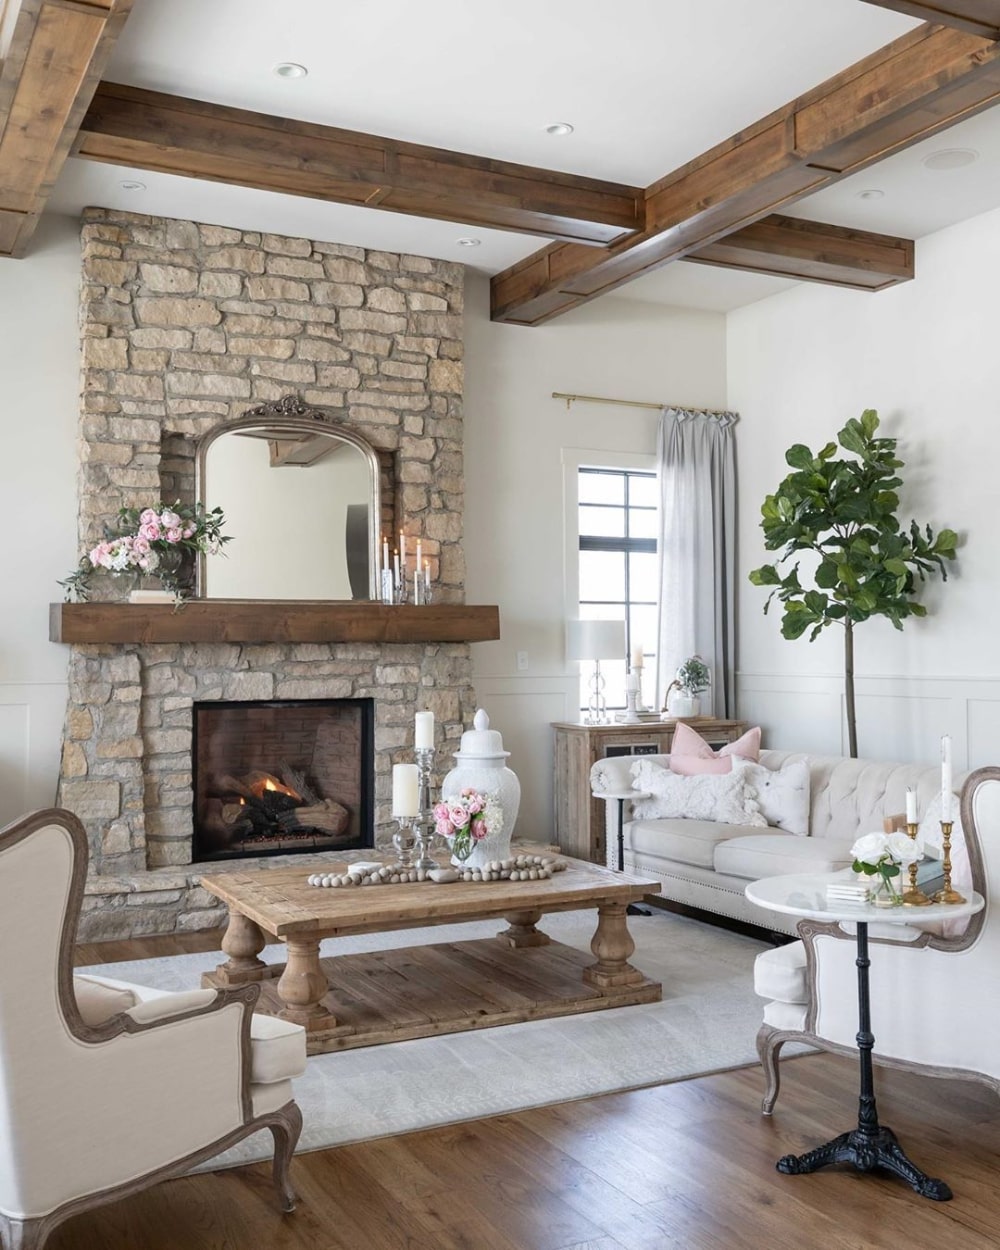 Stunning Wood Accents In the French Country Living Room